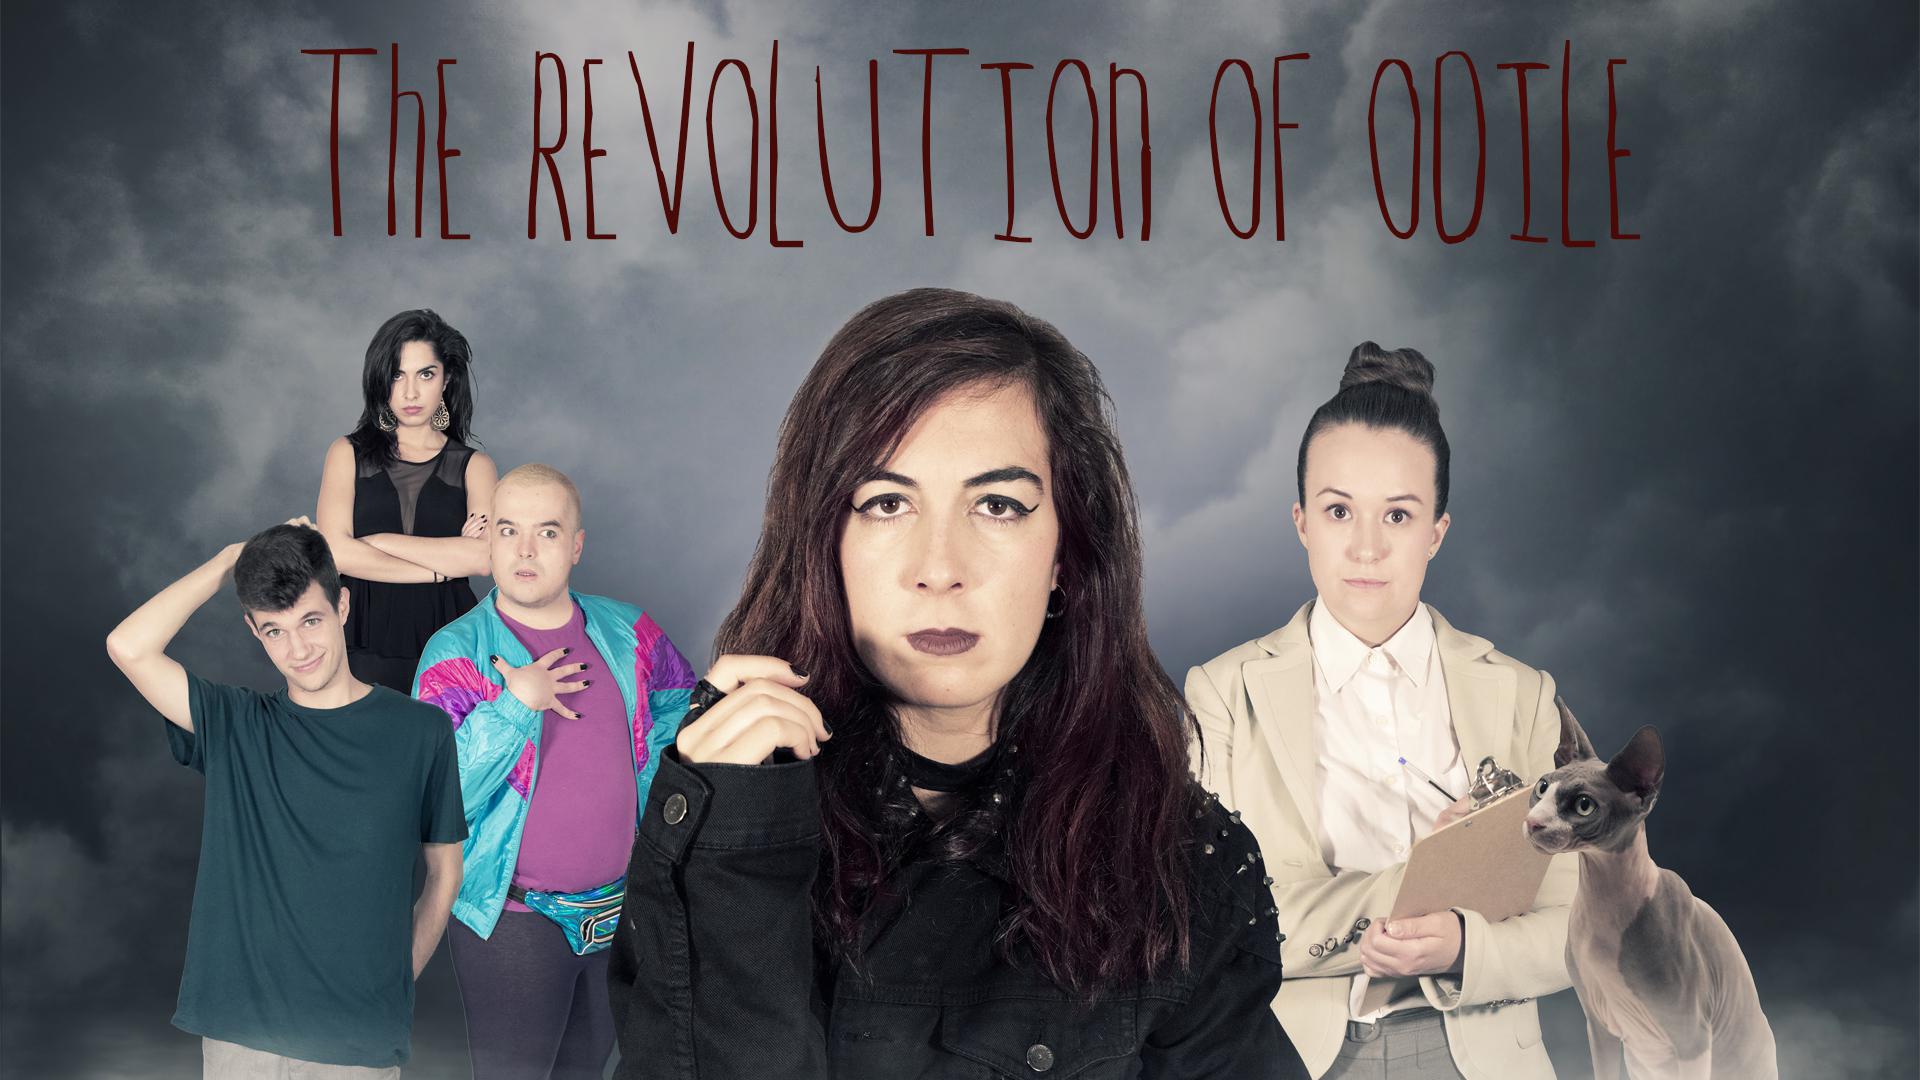 The Revolution of Odile